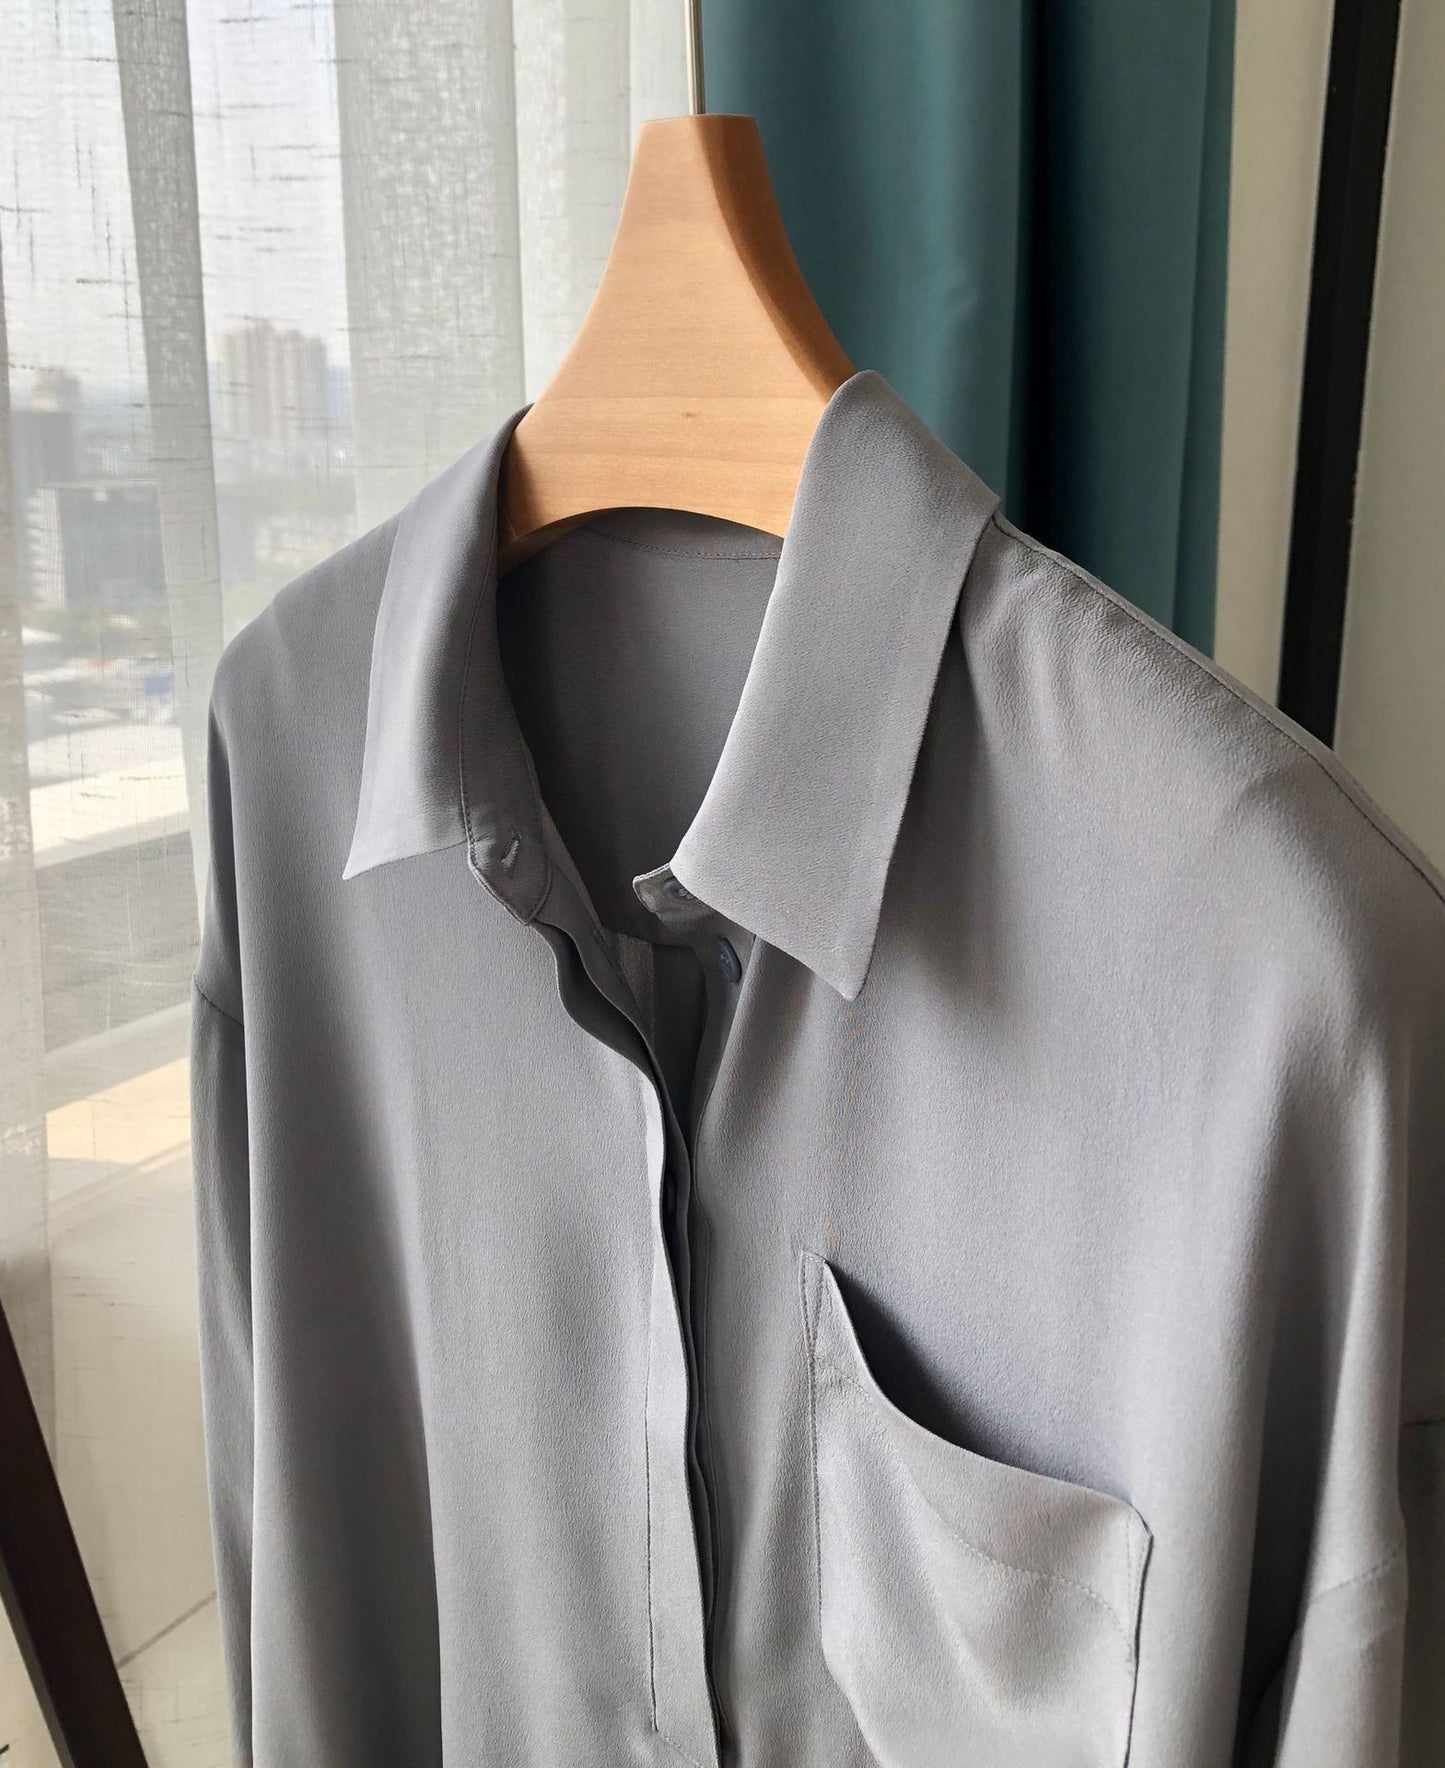 Sand Washed Silk Shirt - by Gioventù